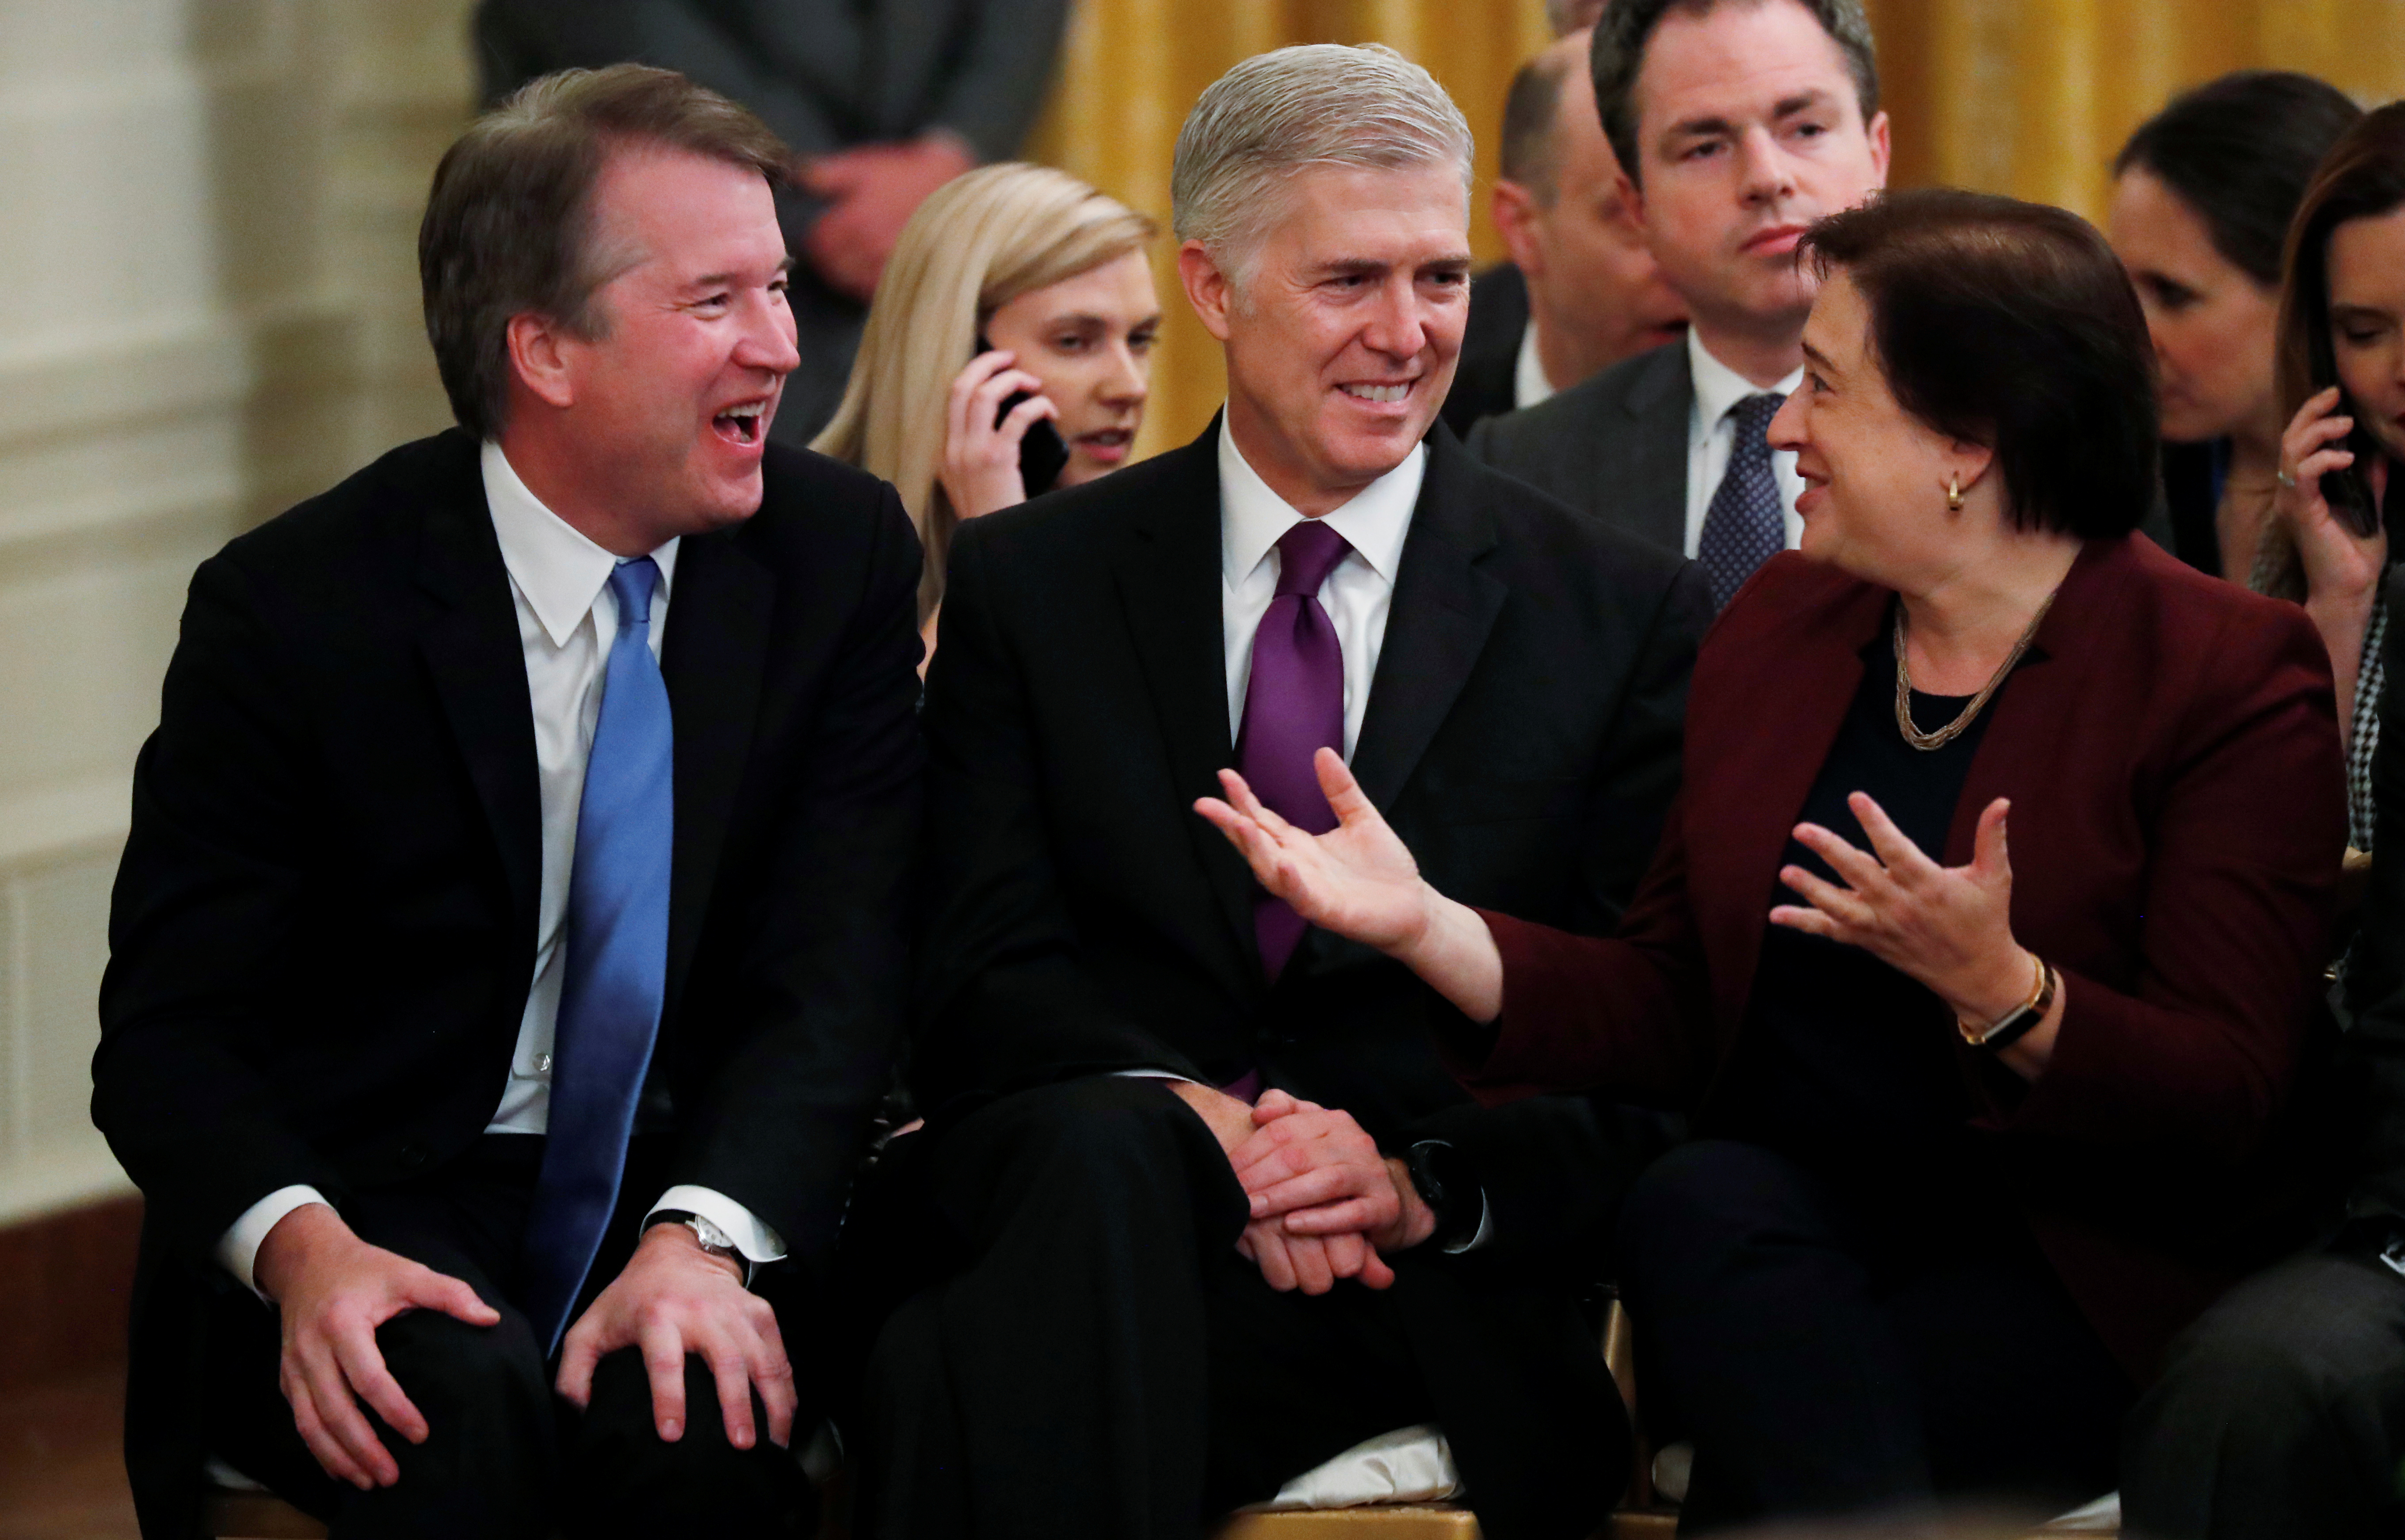 Justices Brett Kavanaugh, Neil Gorsuch and Elena Kagan talk as they attend a ceremony where President Donald Trump awarded the 2018 Presidential Medals of Freedom in the East Room of the White House. November 16, 2018. REUTERS/Jonathan Ernst